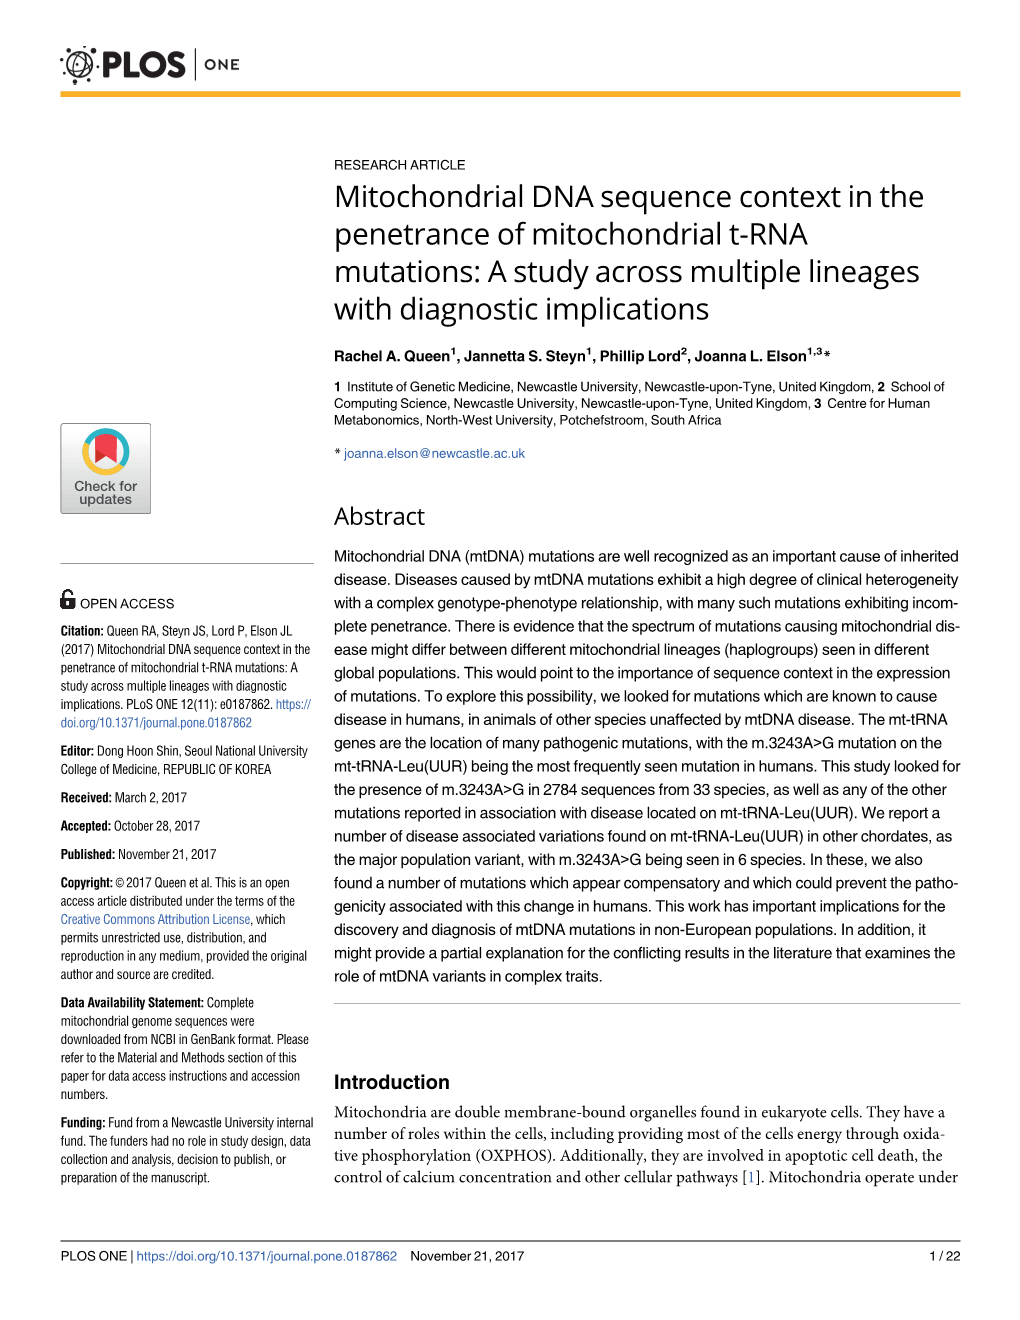 Mitochondrial DNA Sequence Context in the Penetrance of Mitochondrial T-RNA Mutations: a Study Across Multiple Lineages with Diagnostic Implications